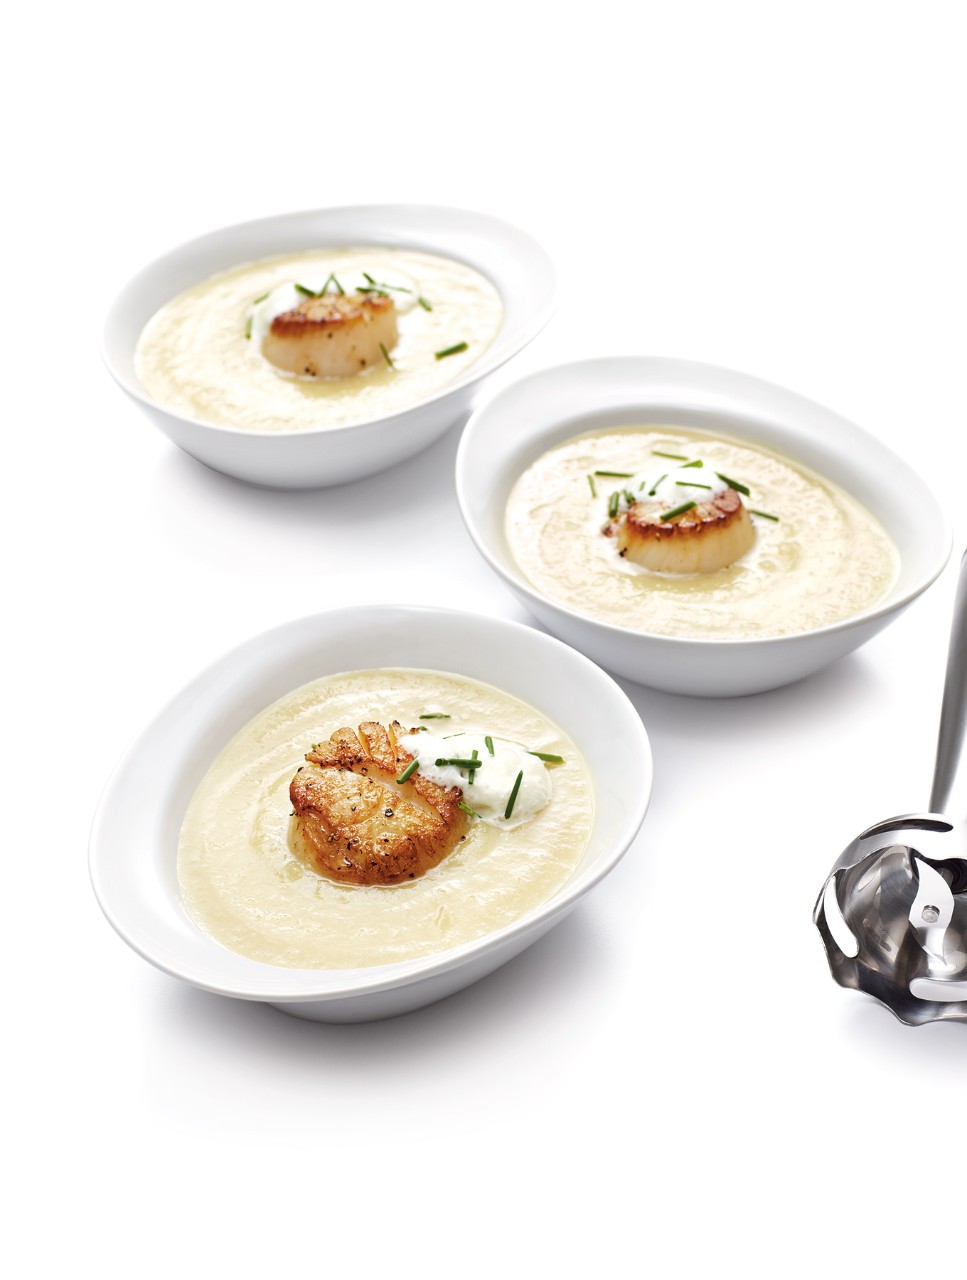 Parsnip Soup with Scallops and Grated Horseradish Froth